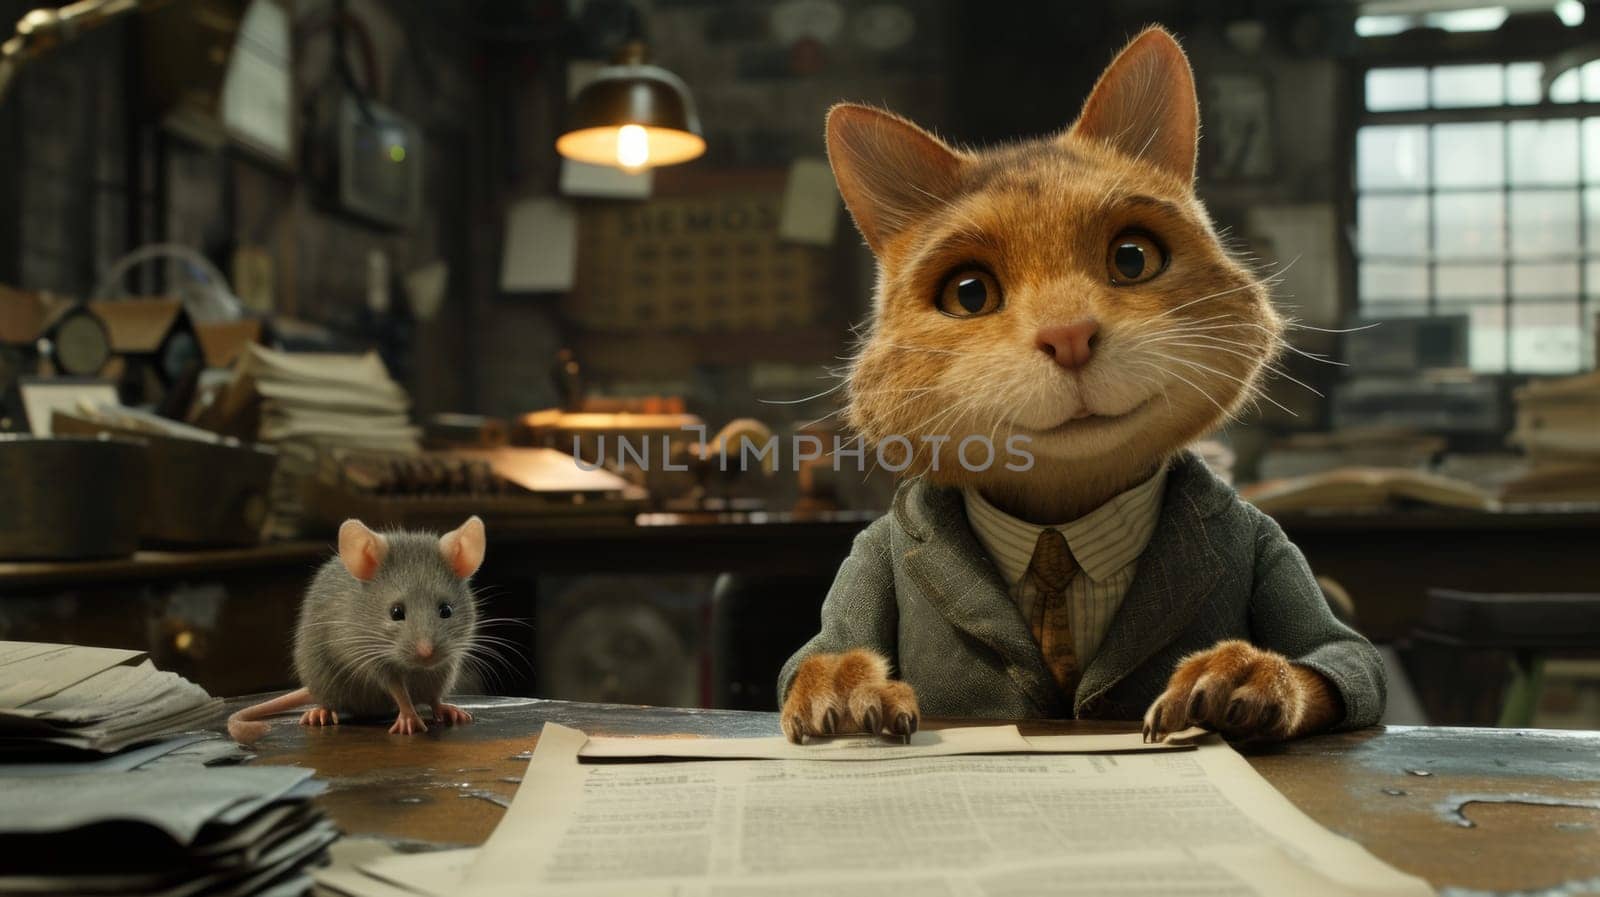 A cat in a suit and tie sitting at the desk with two mice